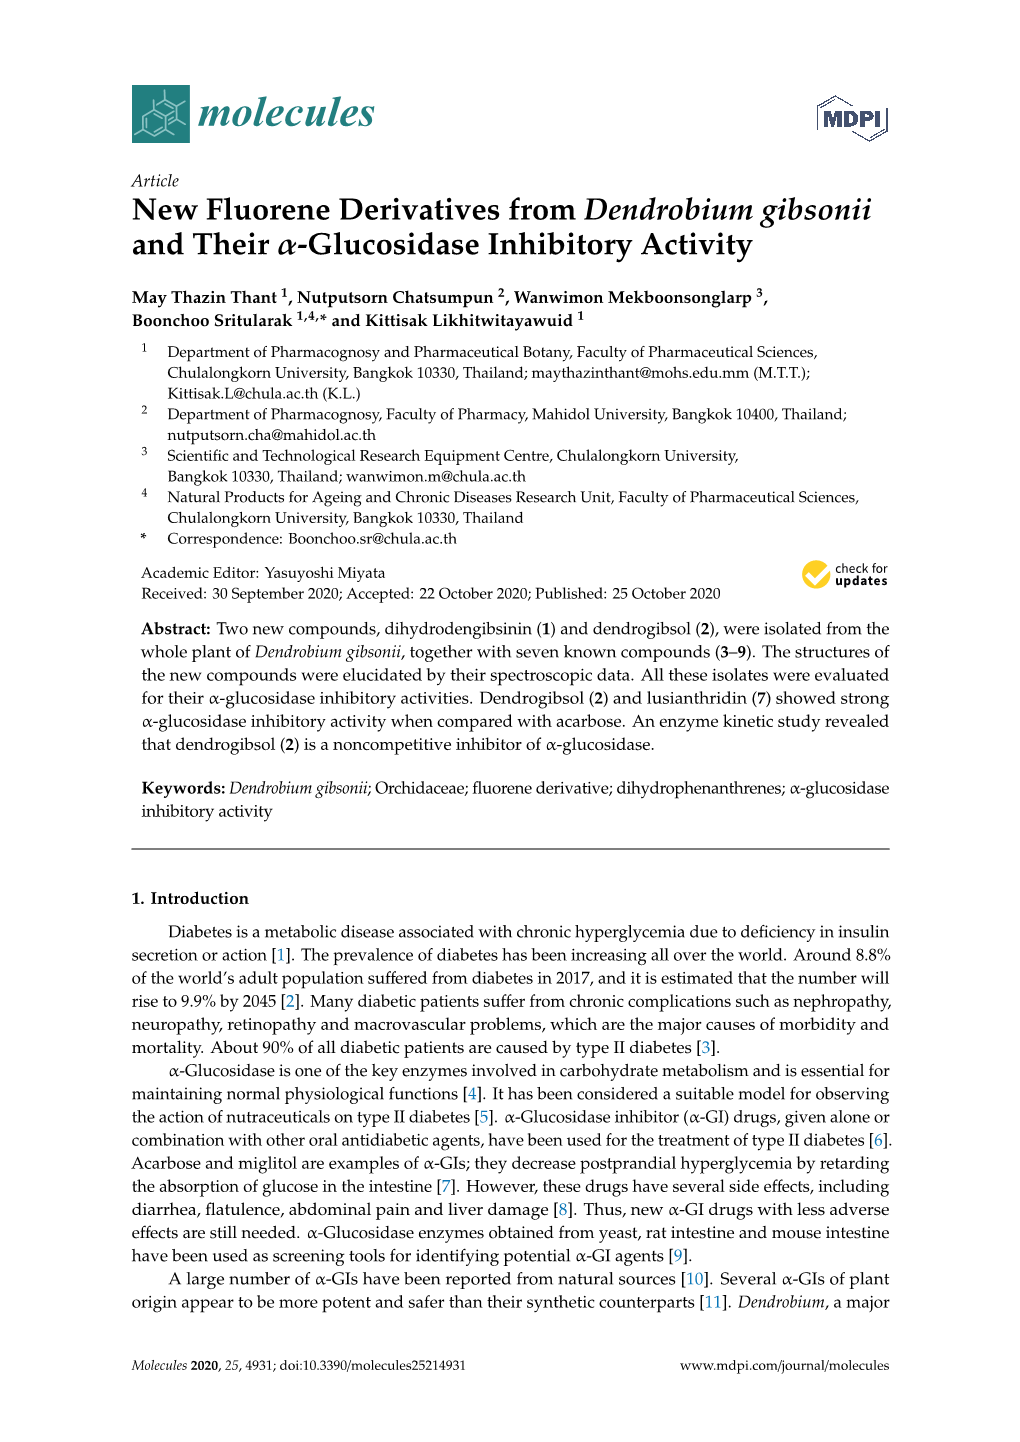 New Fluorene Derivatives from Dendrobium Gibsonii and Their Α-Glucosidase Inhibitory Activity